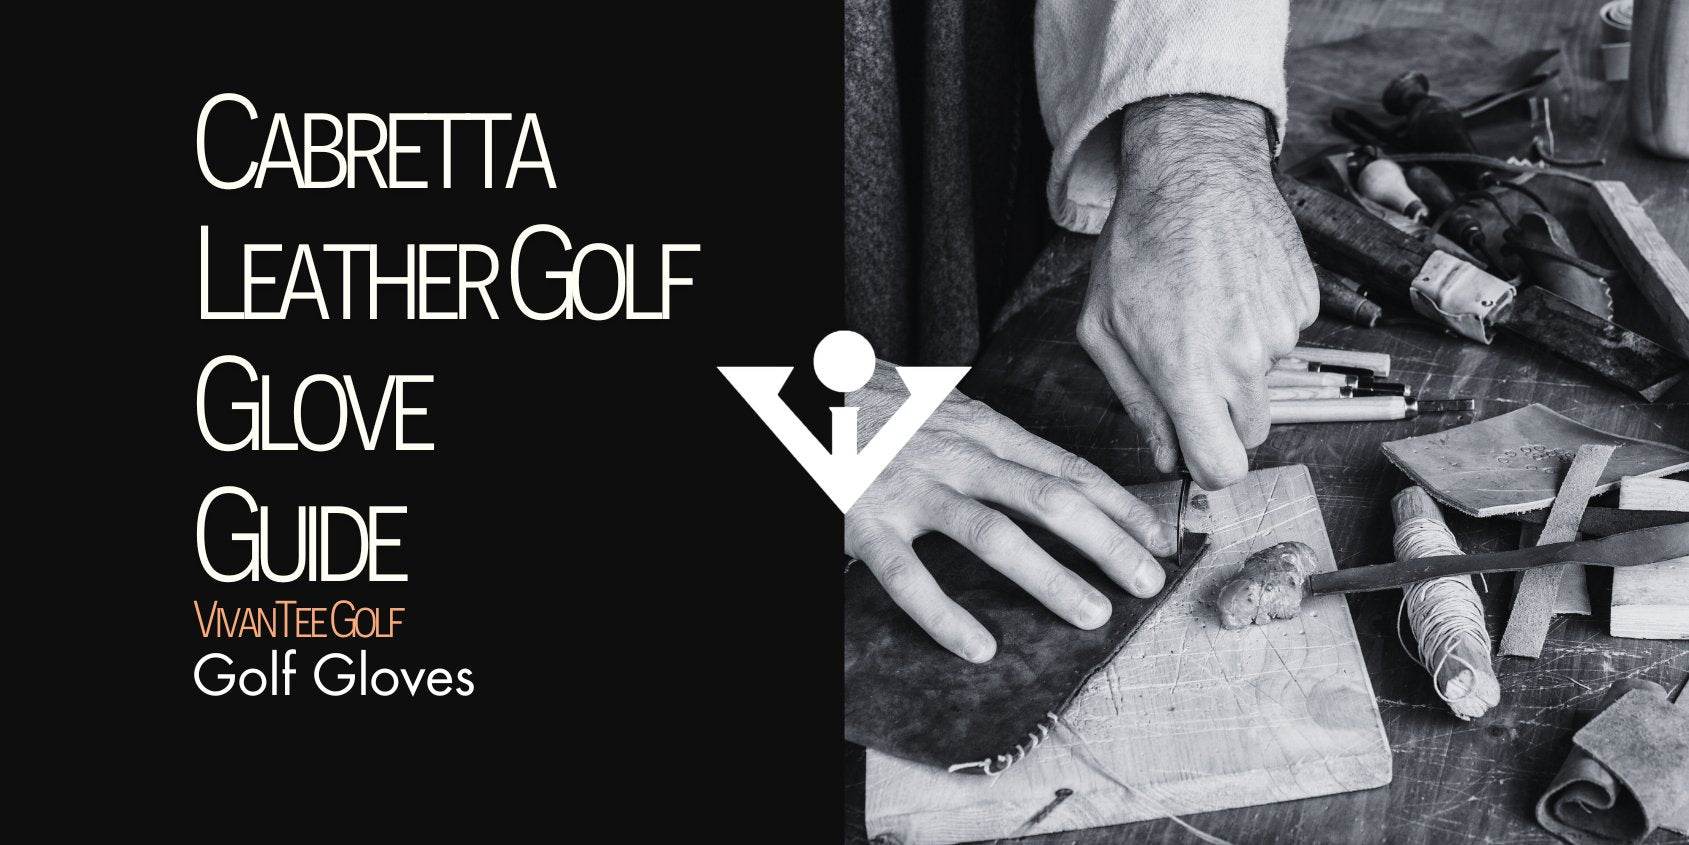 Image of a workshop with leather on a table, in our signature blog banner format for our cabretta leather golf glove article.